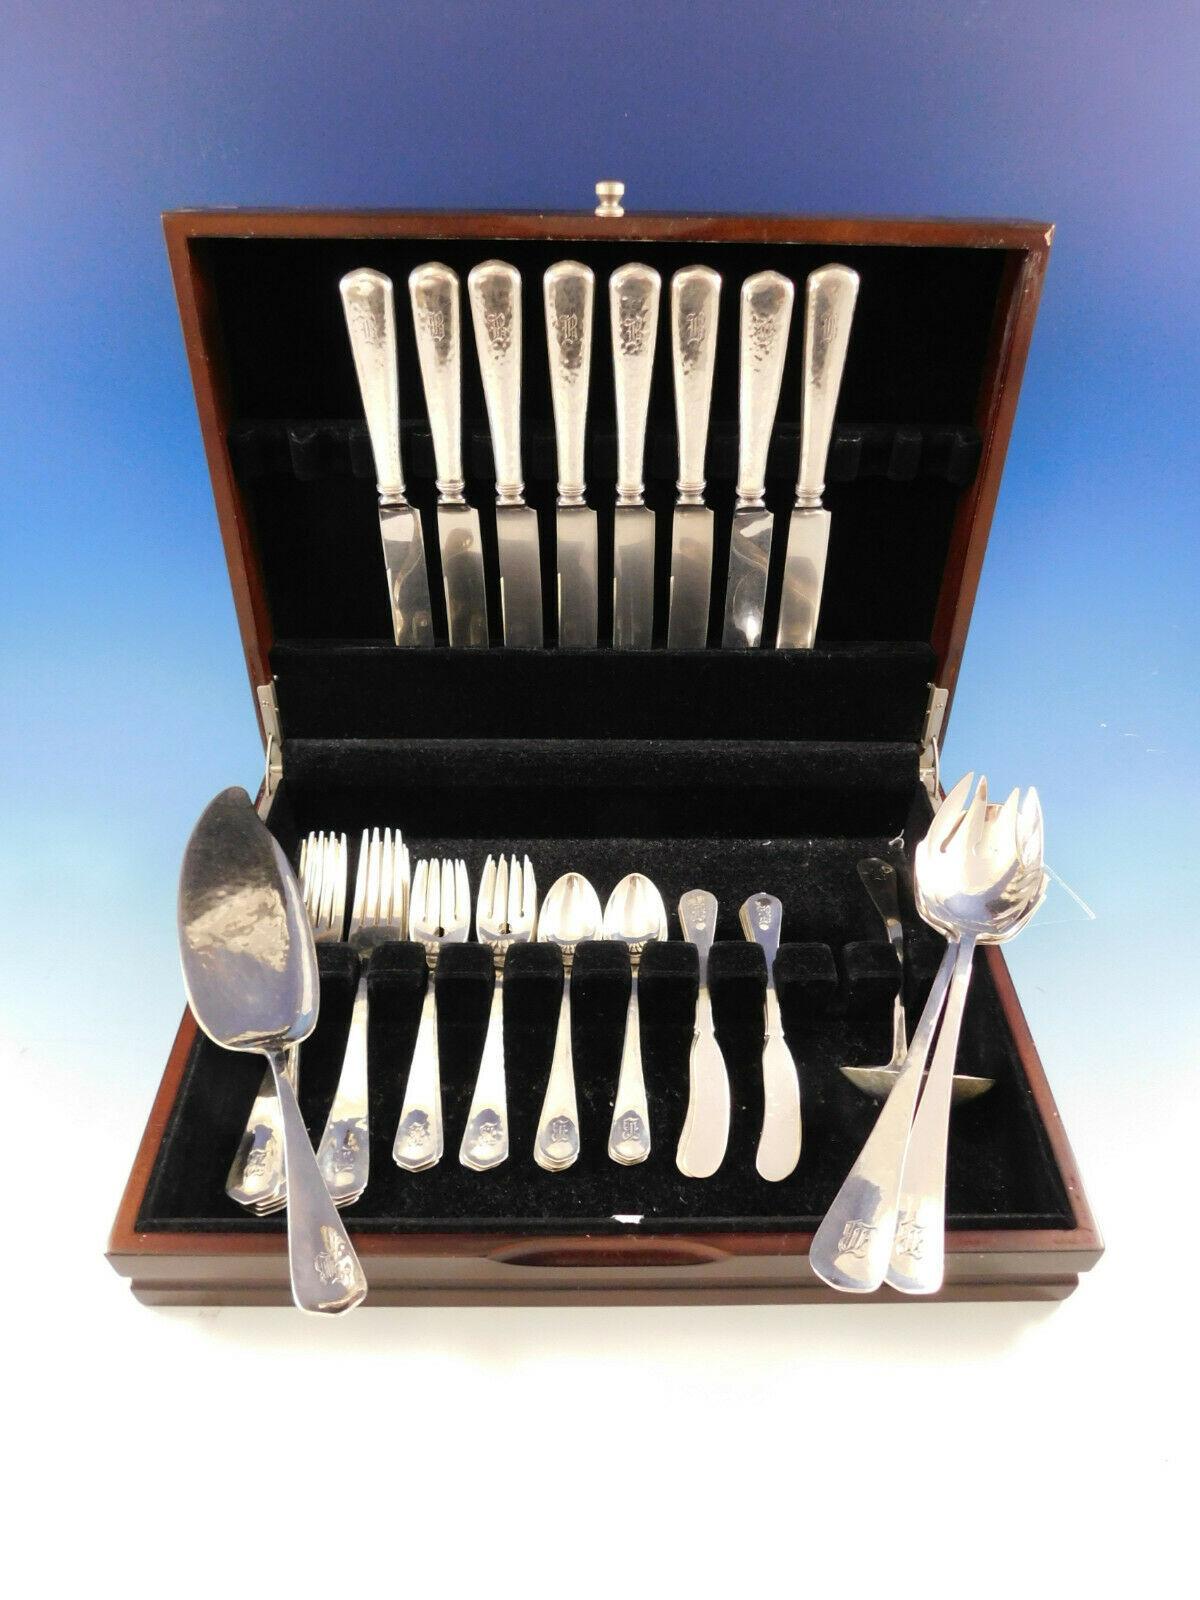 Superb Lebolt handwrought Chicago Arts & Crafts sterling silver flatware set - 44 pieces. This set is beautifully hand-hammered. This set includes:

8 dinner size knives, 9 5/8